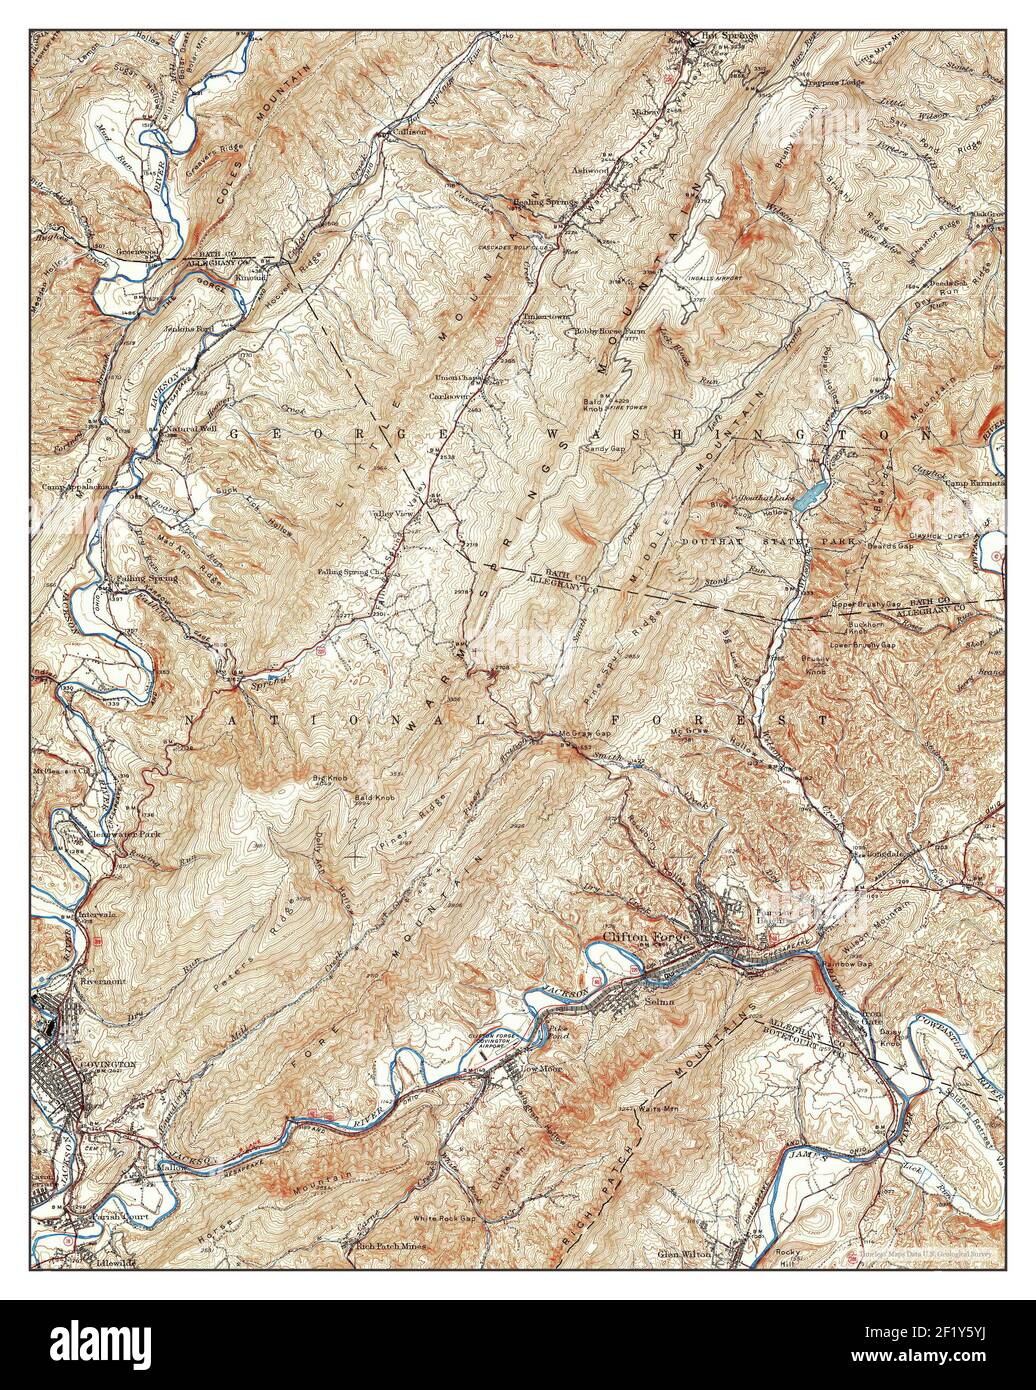 Clifton Forge Virginia Map 1945 162500 United States Of America By Timeless Maps Data Us Geological Survey 2F1Y5YJ 